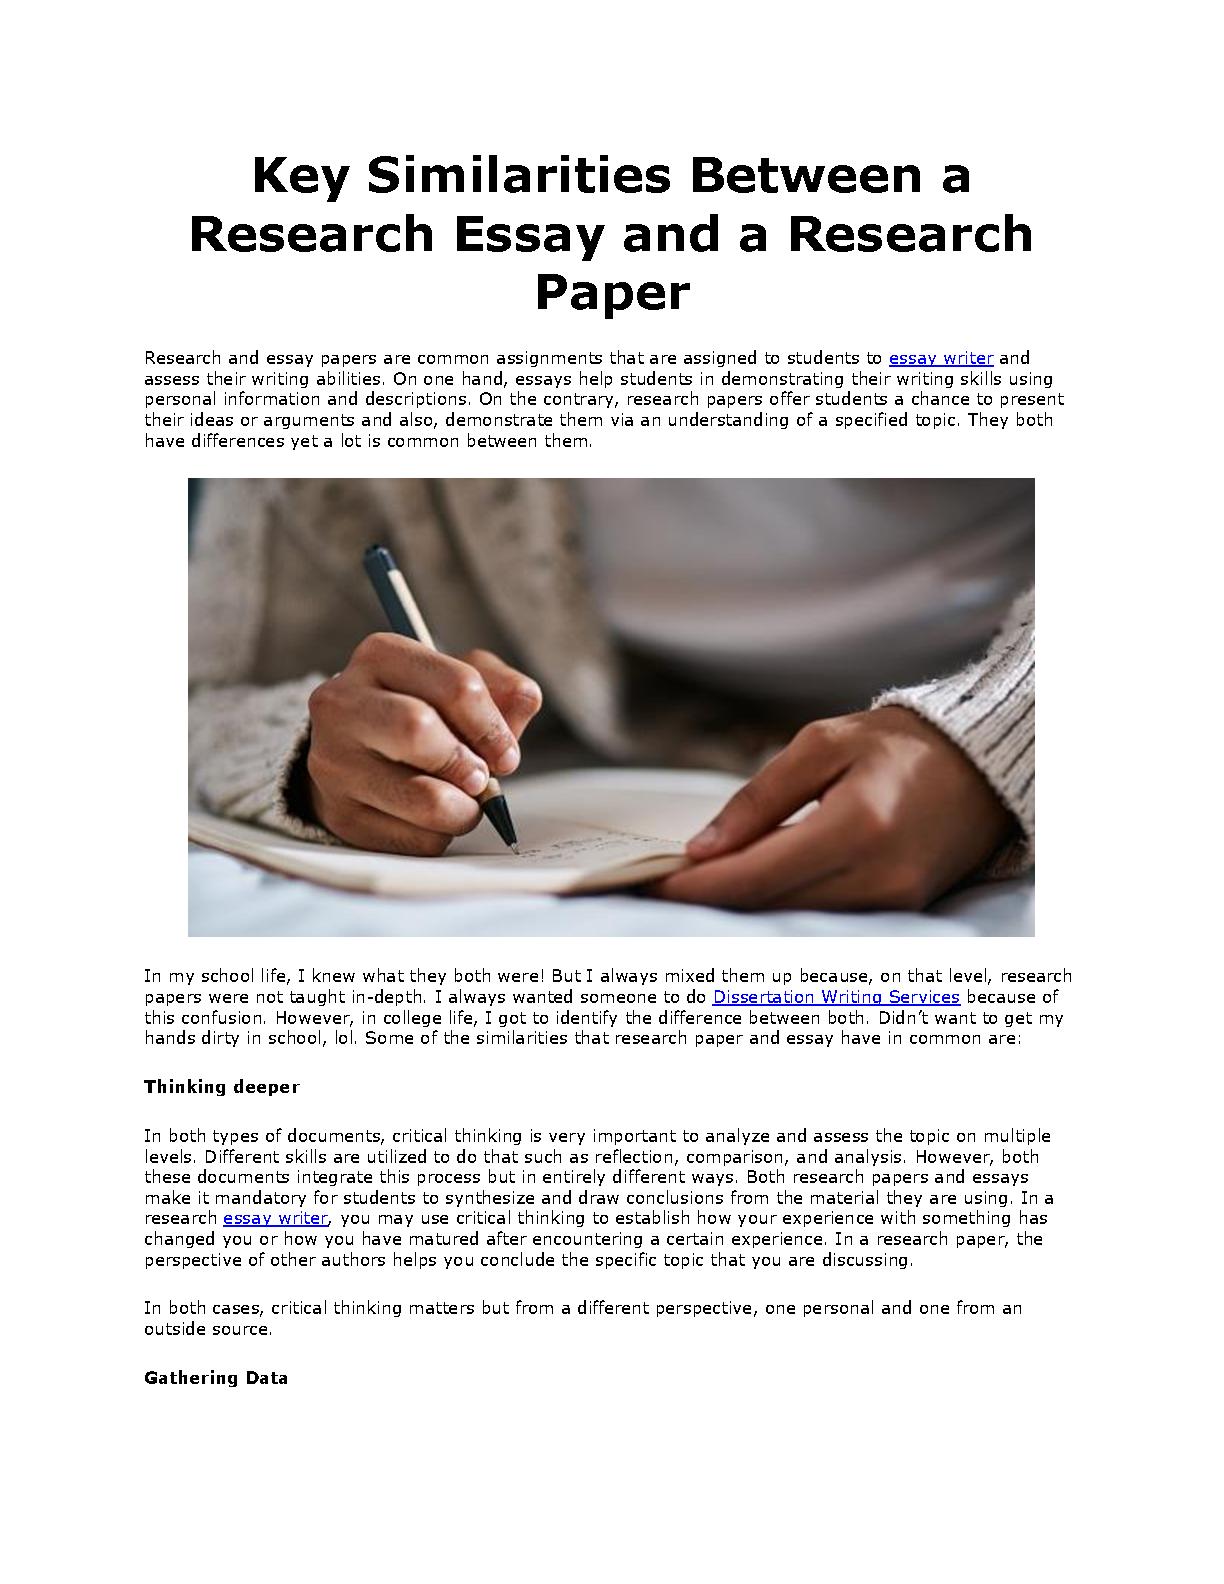 essay and research similarities